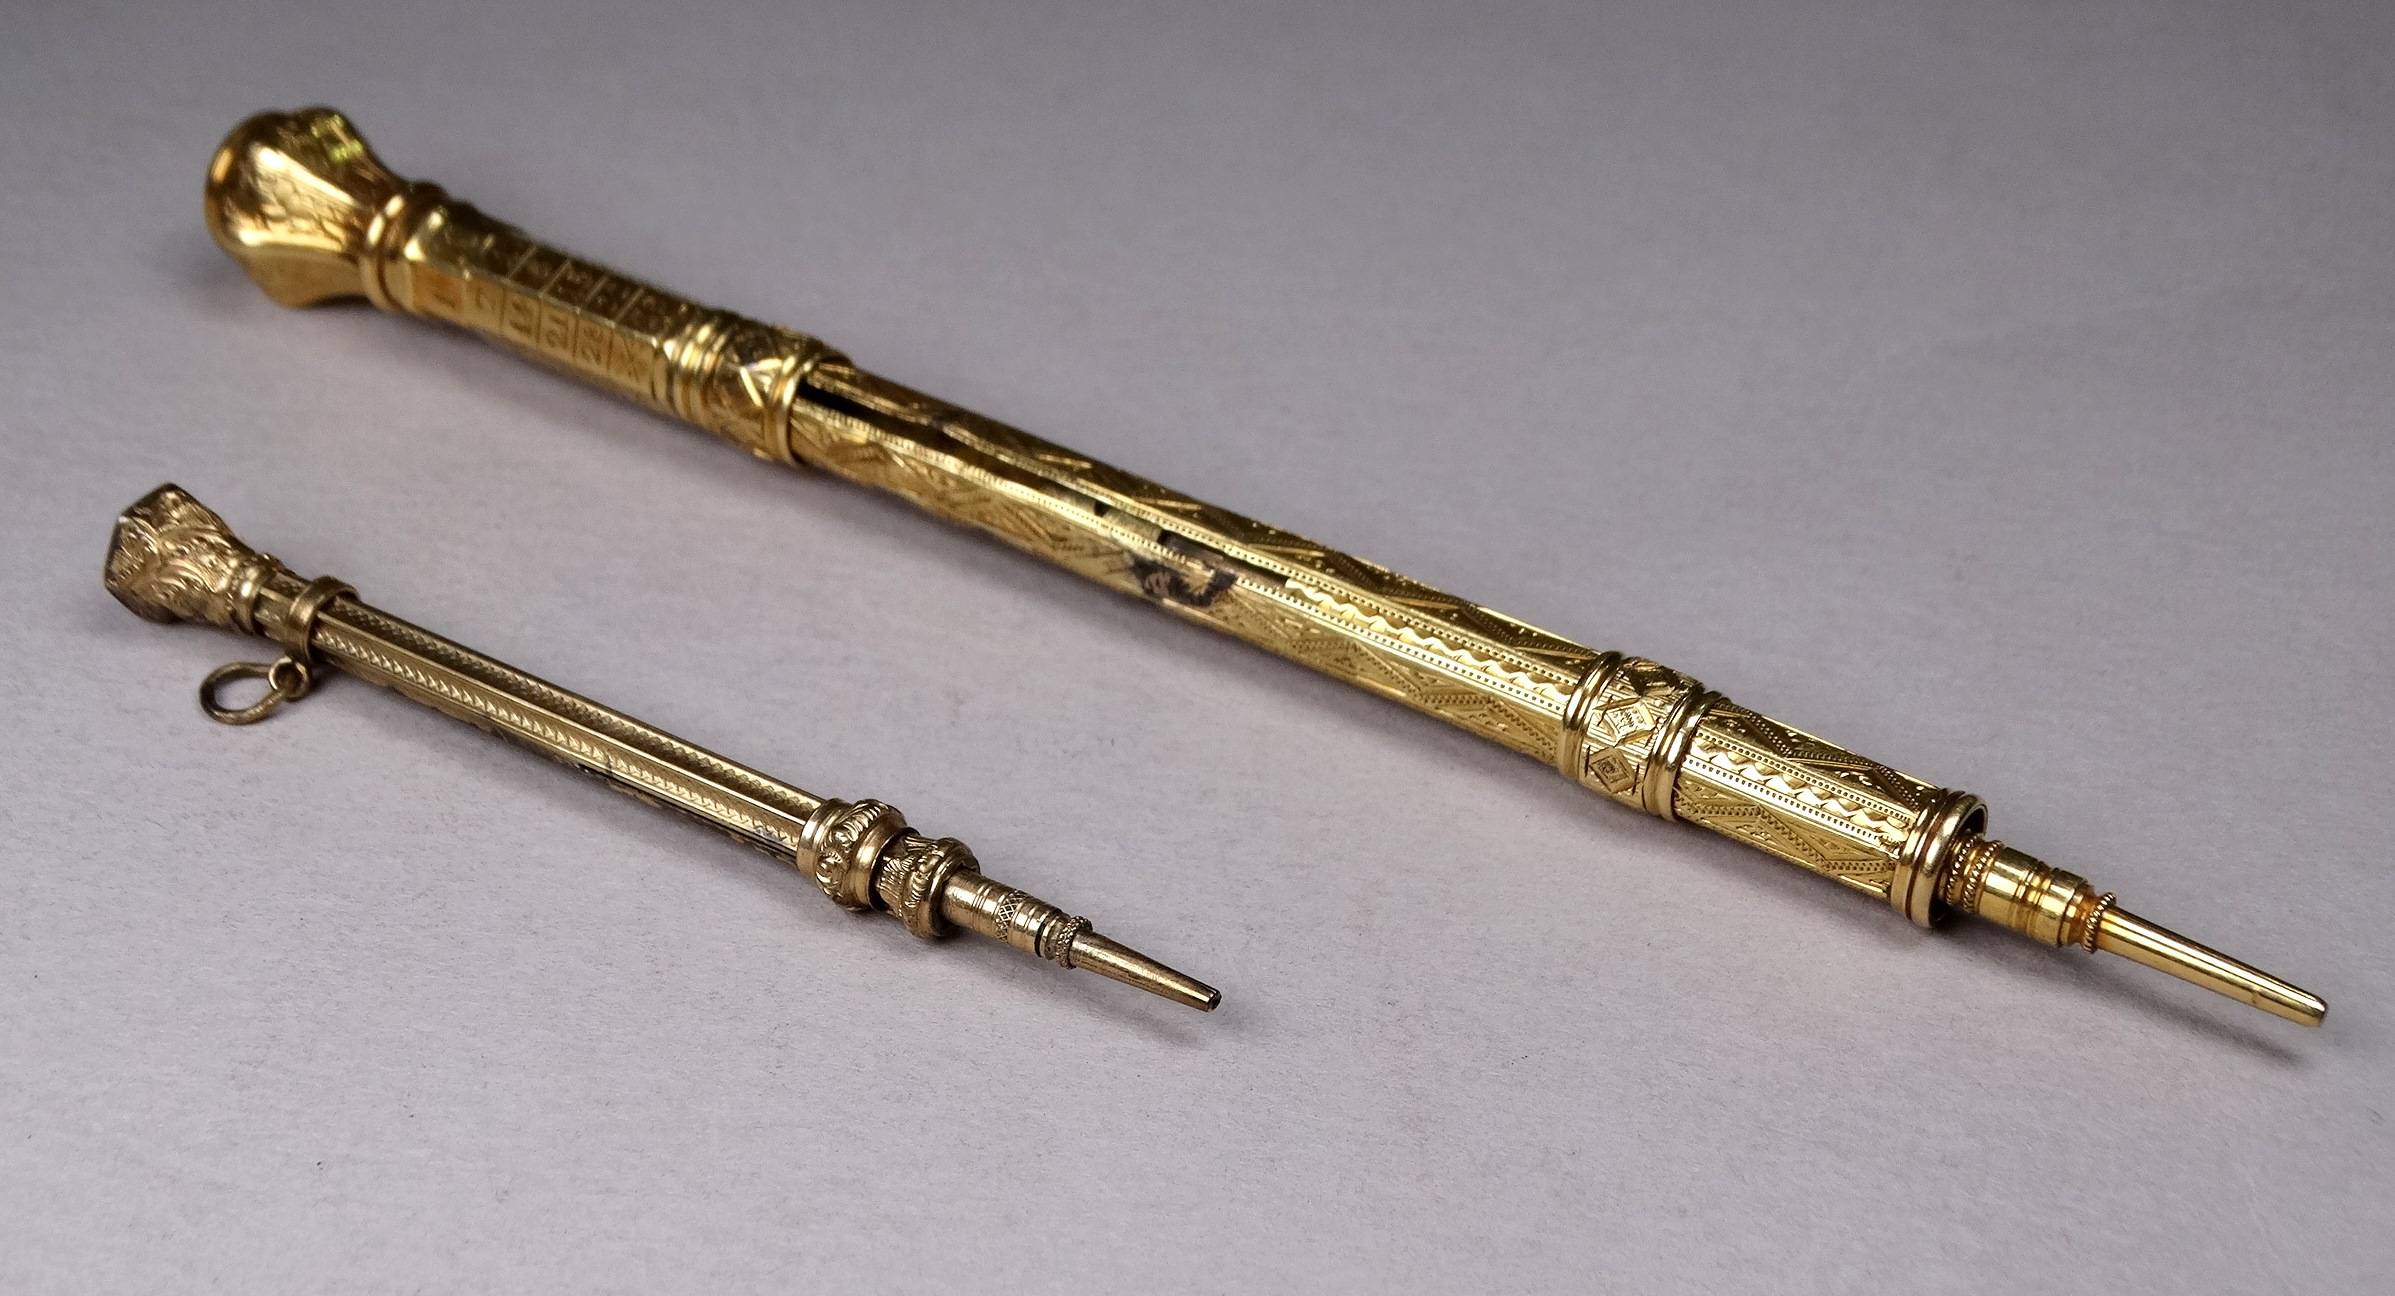 A 19th century gilt pen pencil - incorporating a French perpetual calendar to the top, with a